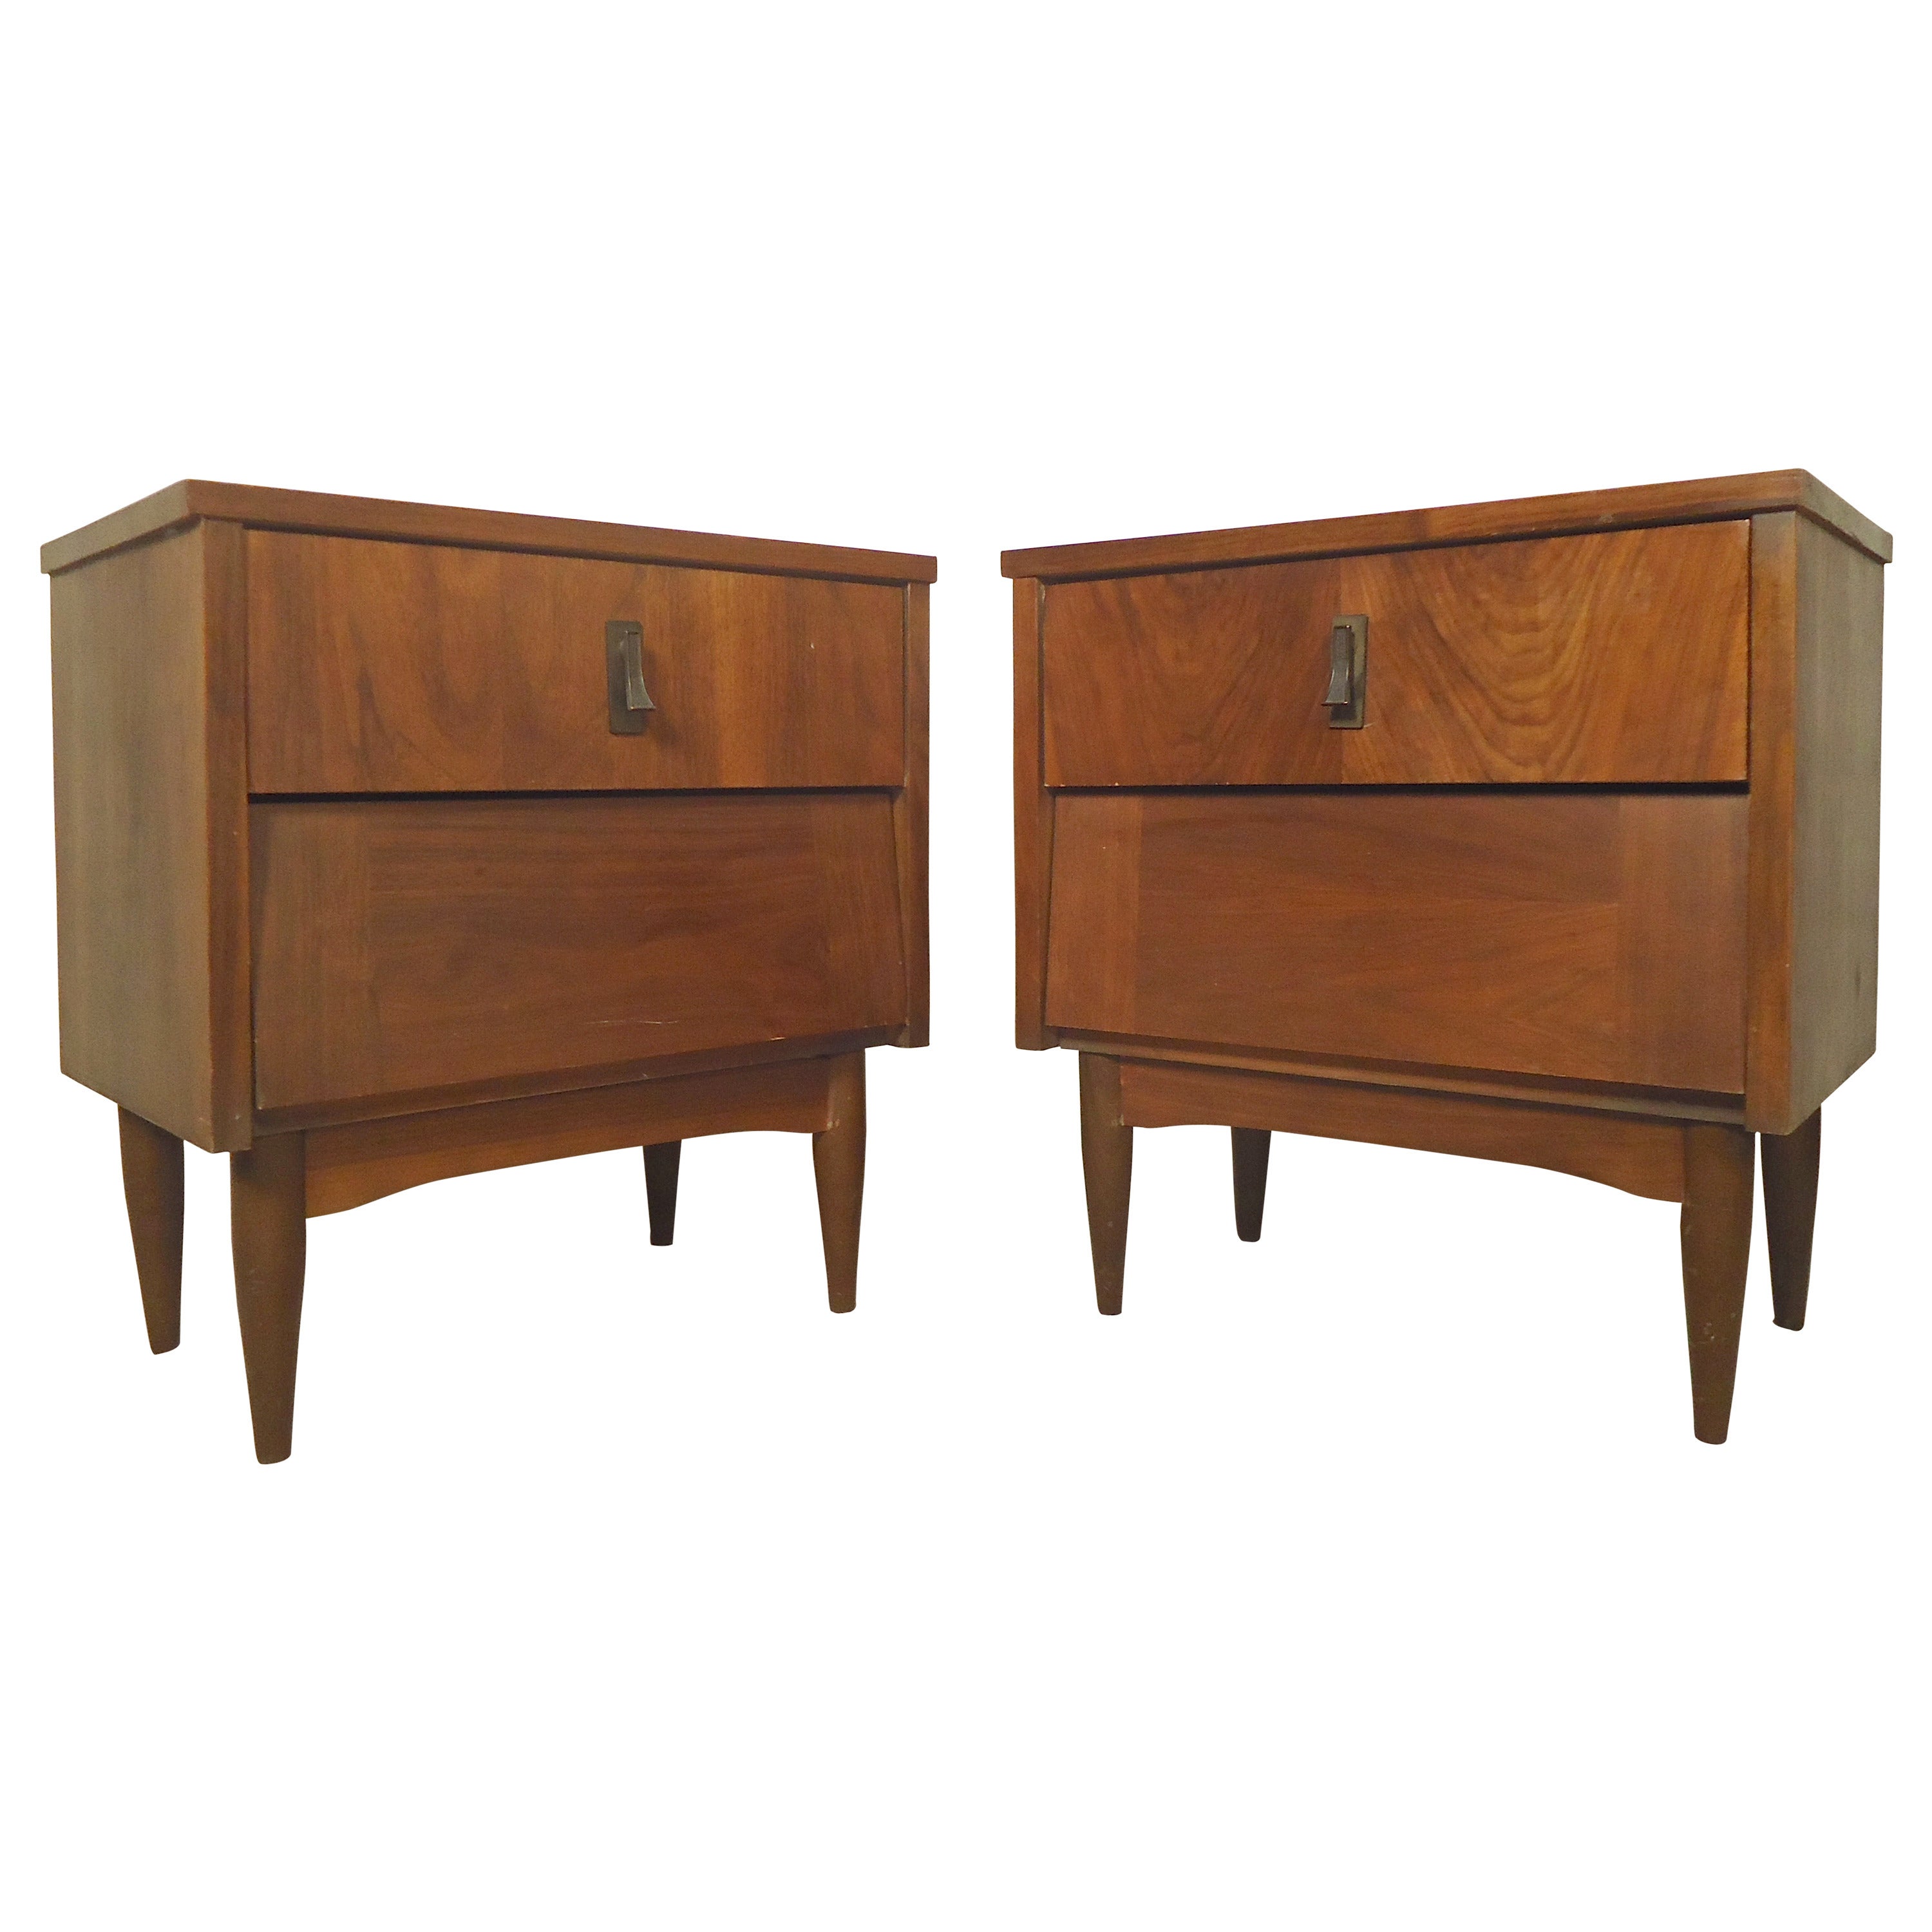 Mid Century Night Stands with Louvered Drawers